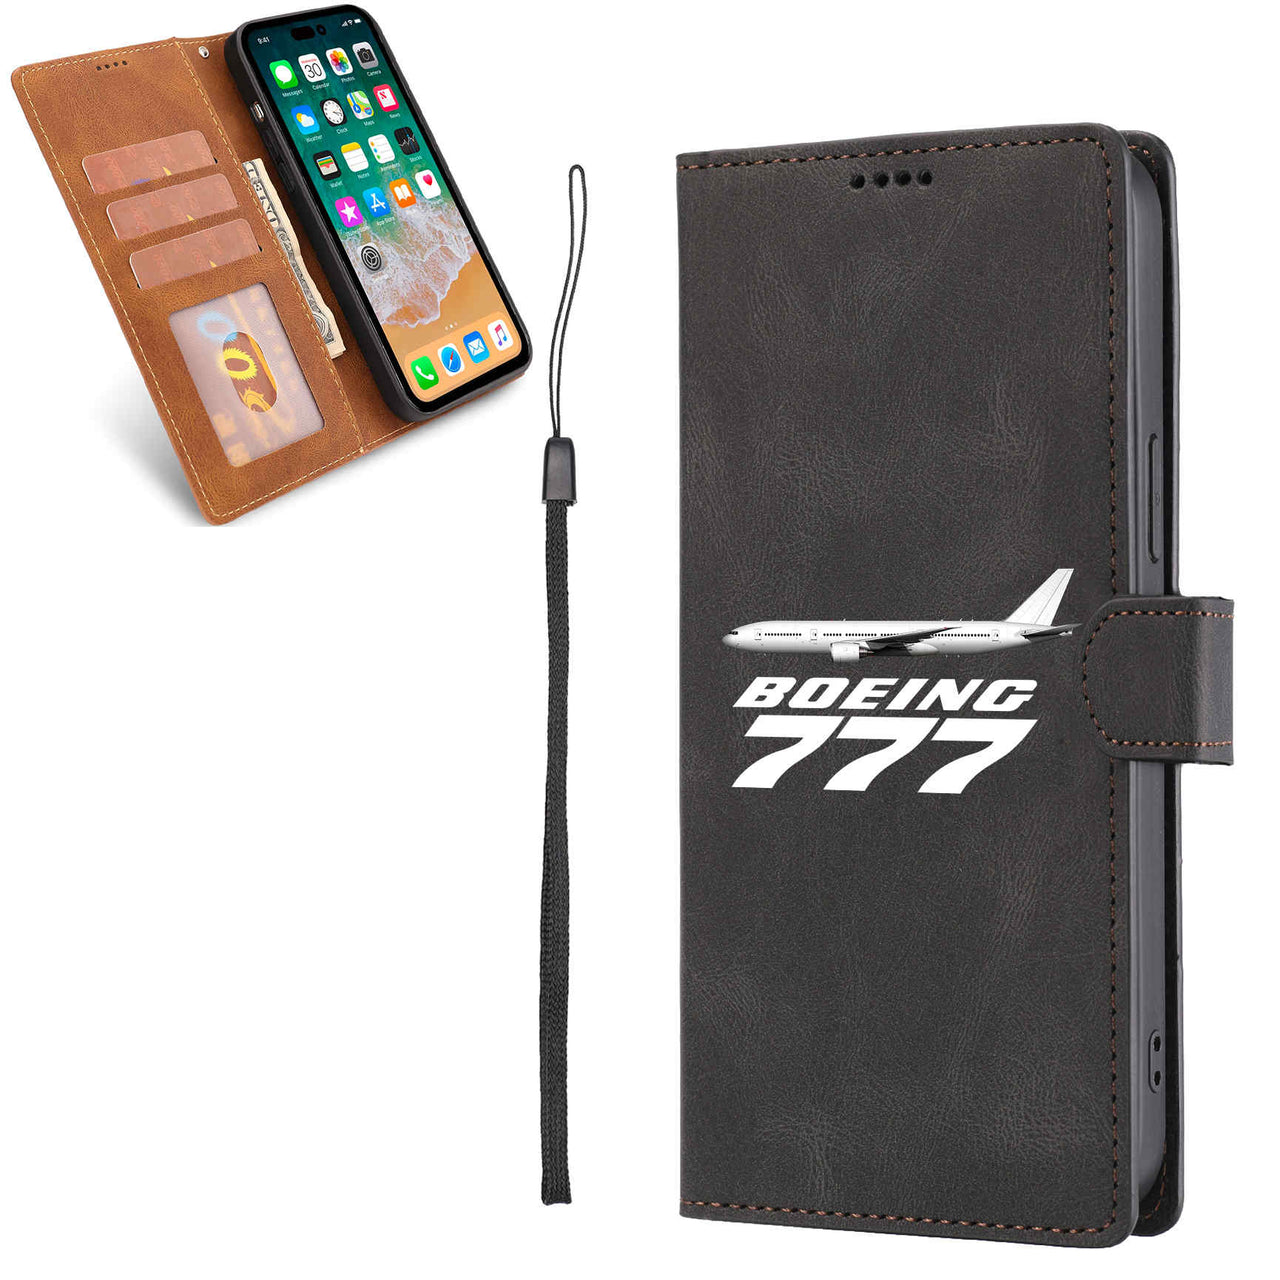 The Boeing 777 Leather Samsung A Cases